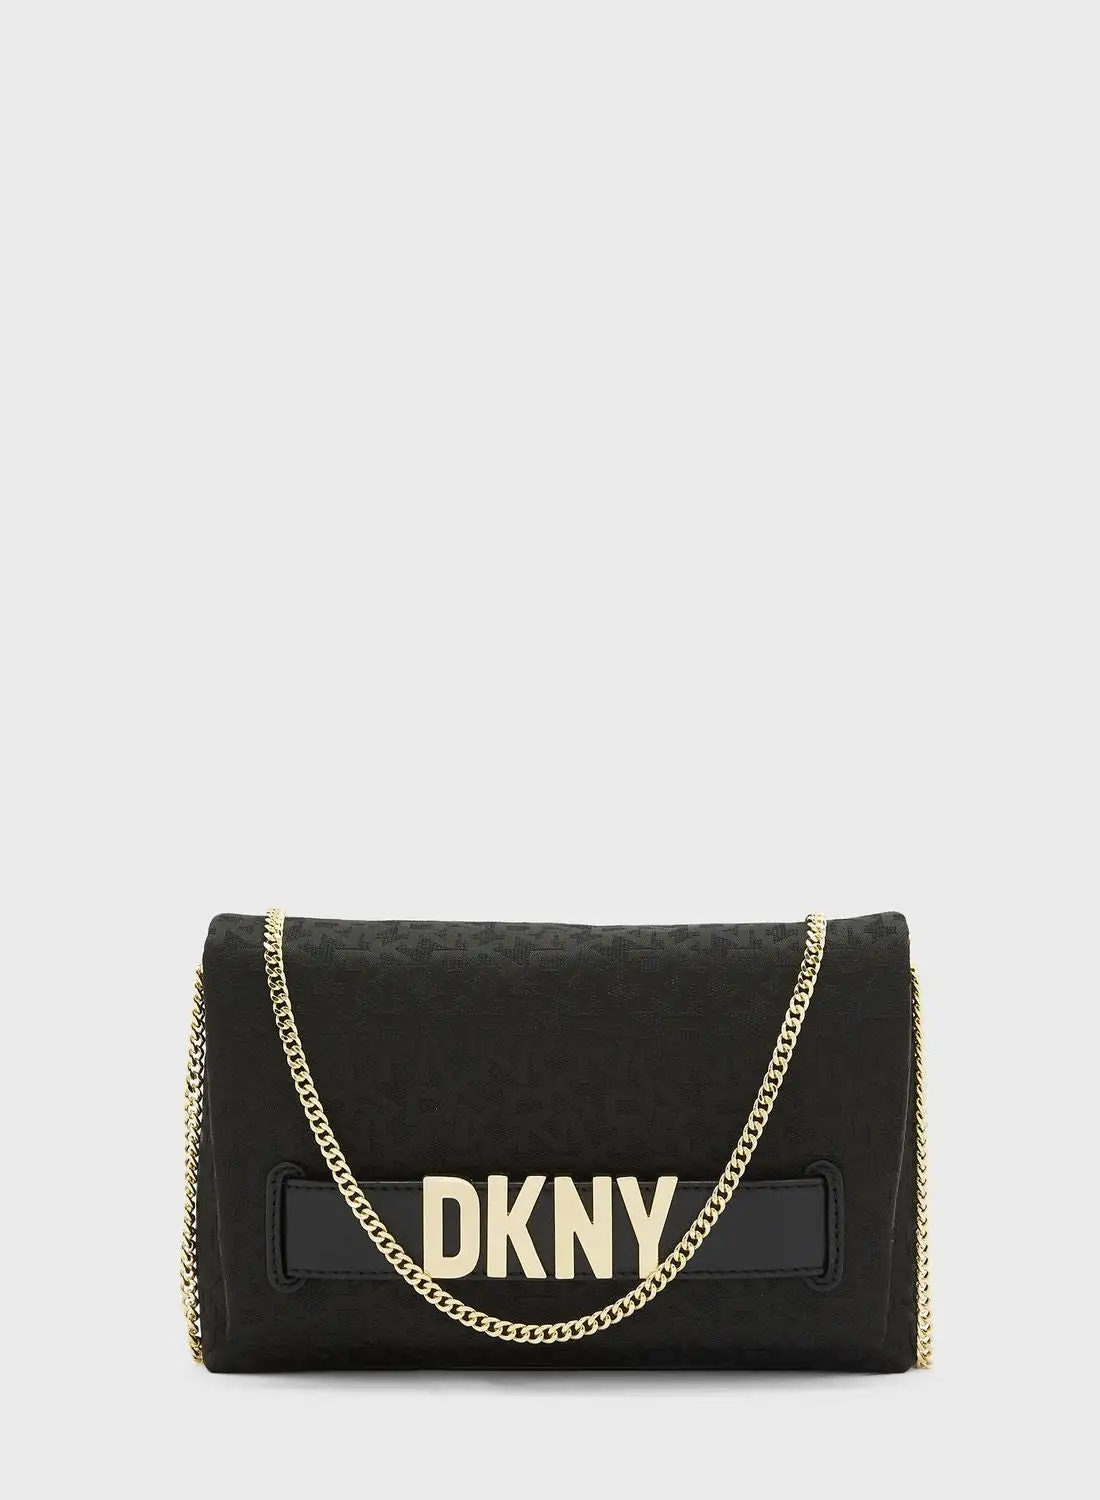 DKNY Pilar Flap Over Clutches Bags